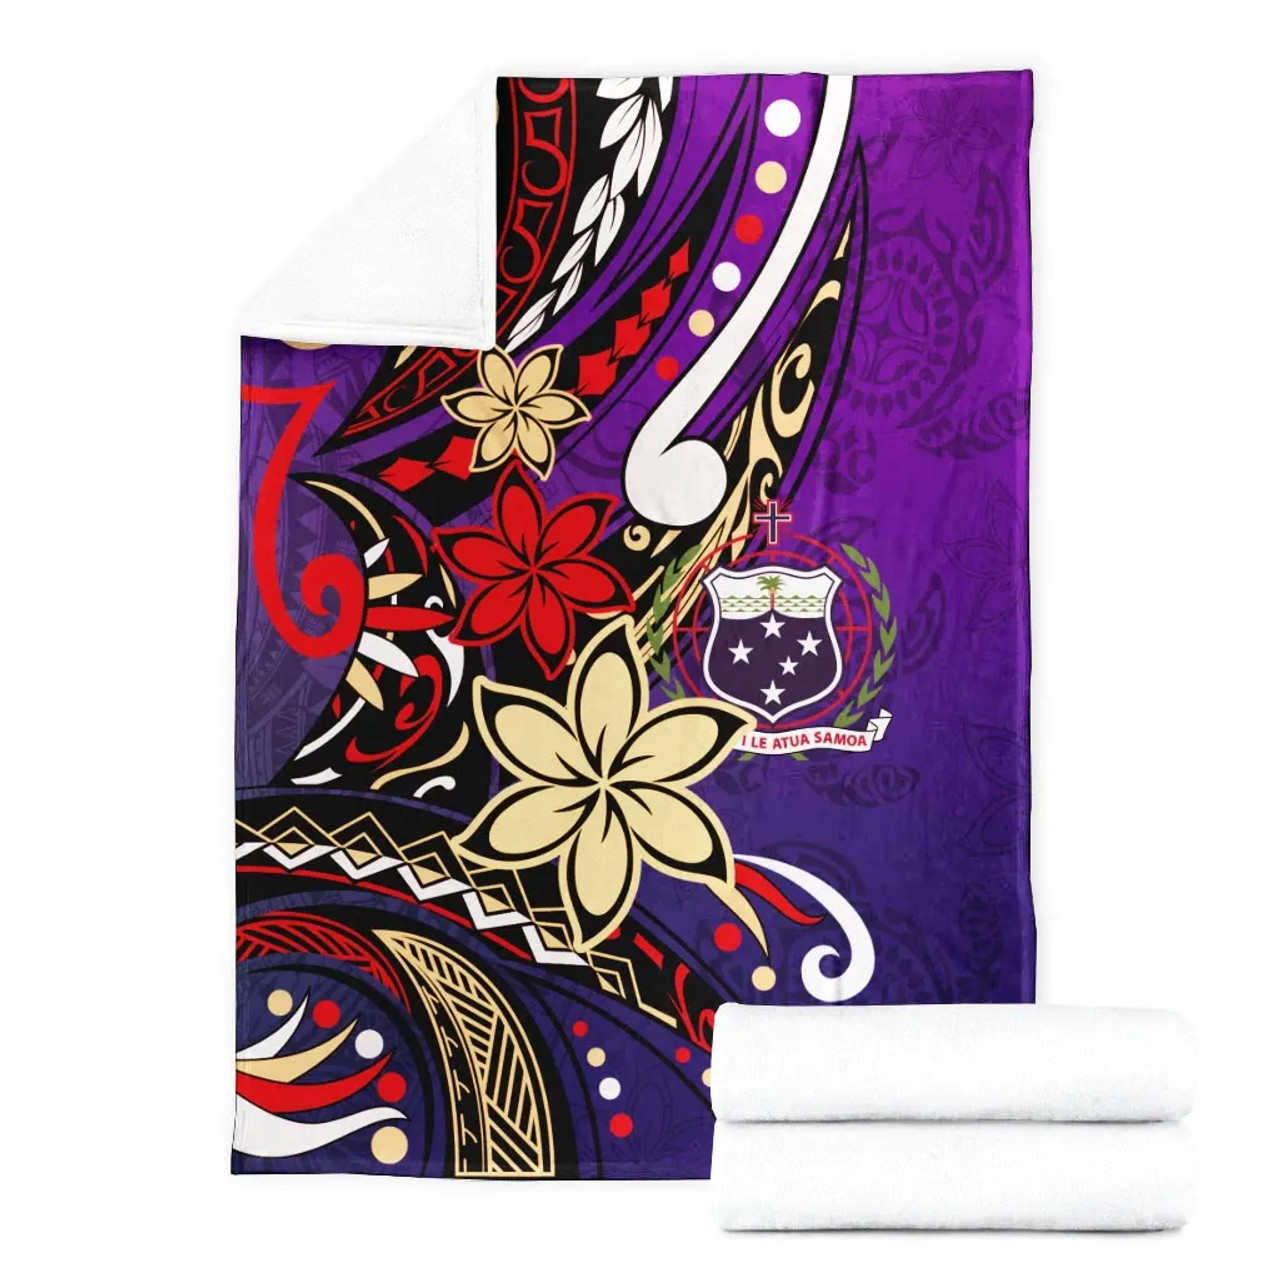 Samoa Premium Blanket - Tribal Flower With Special Turtles Purple Color 7